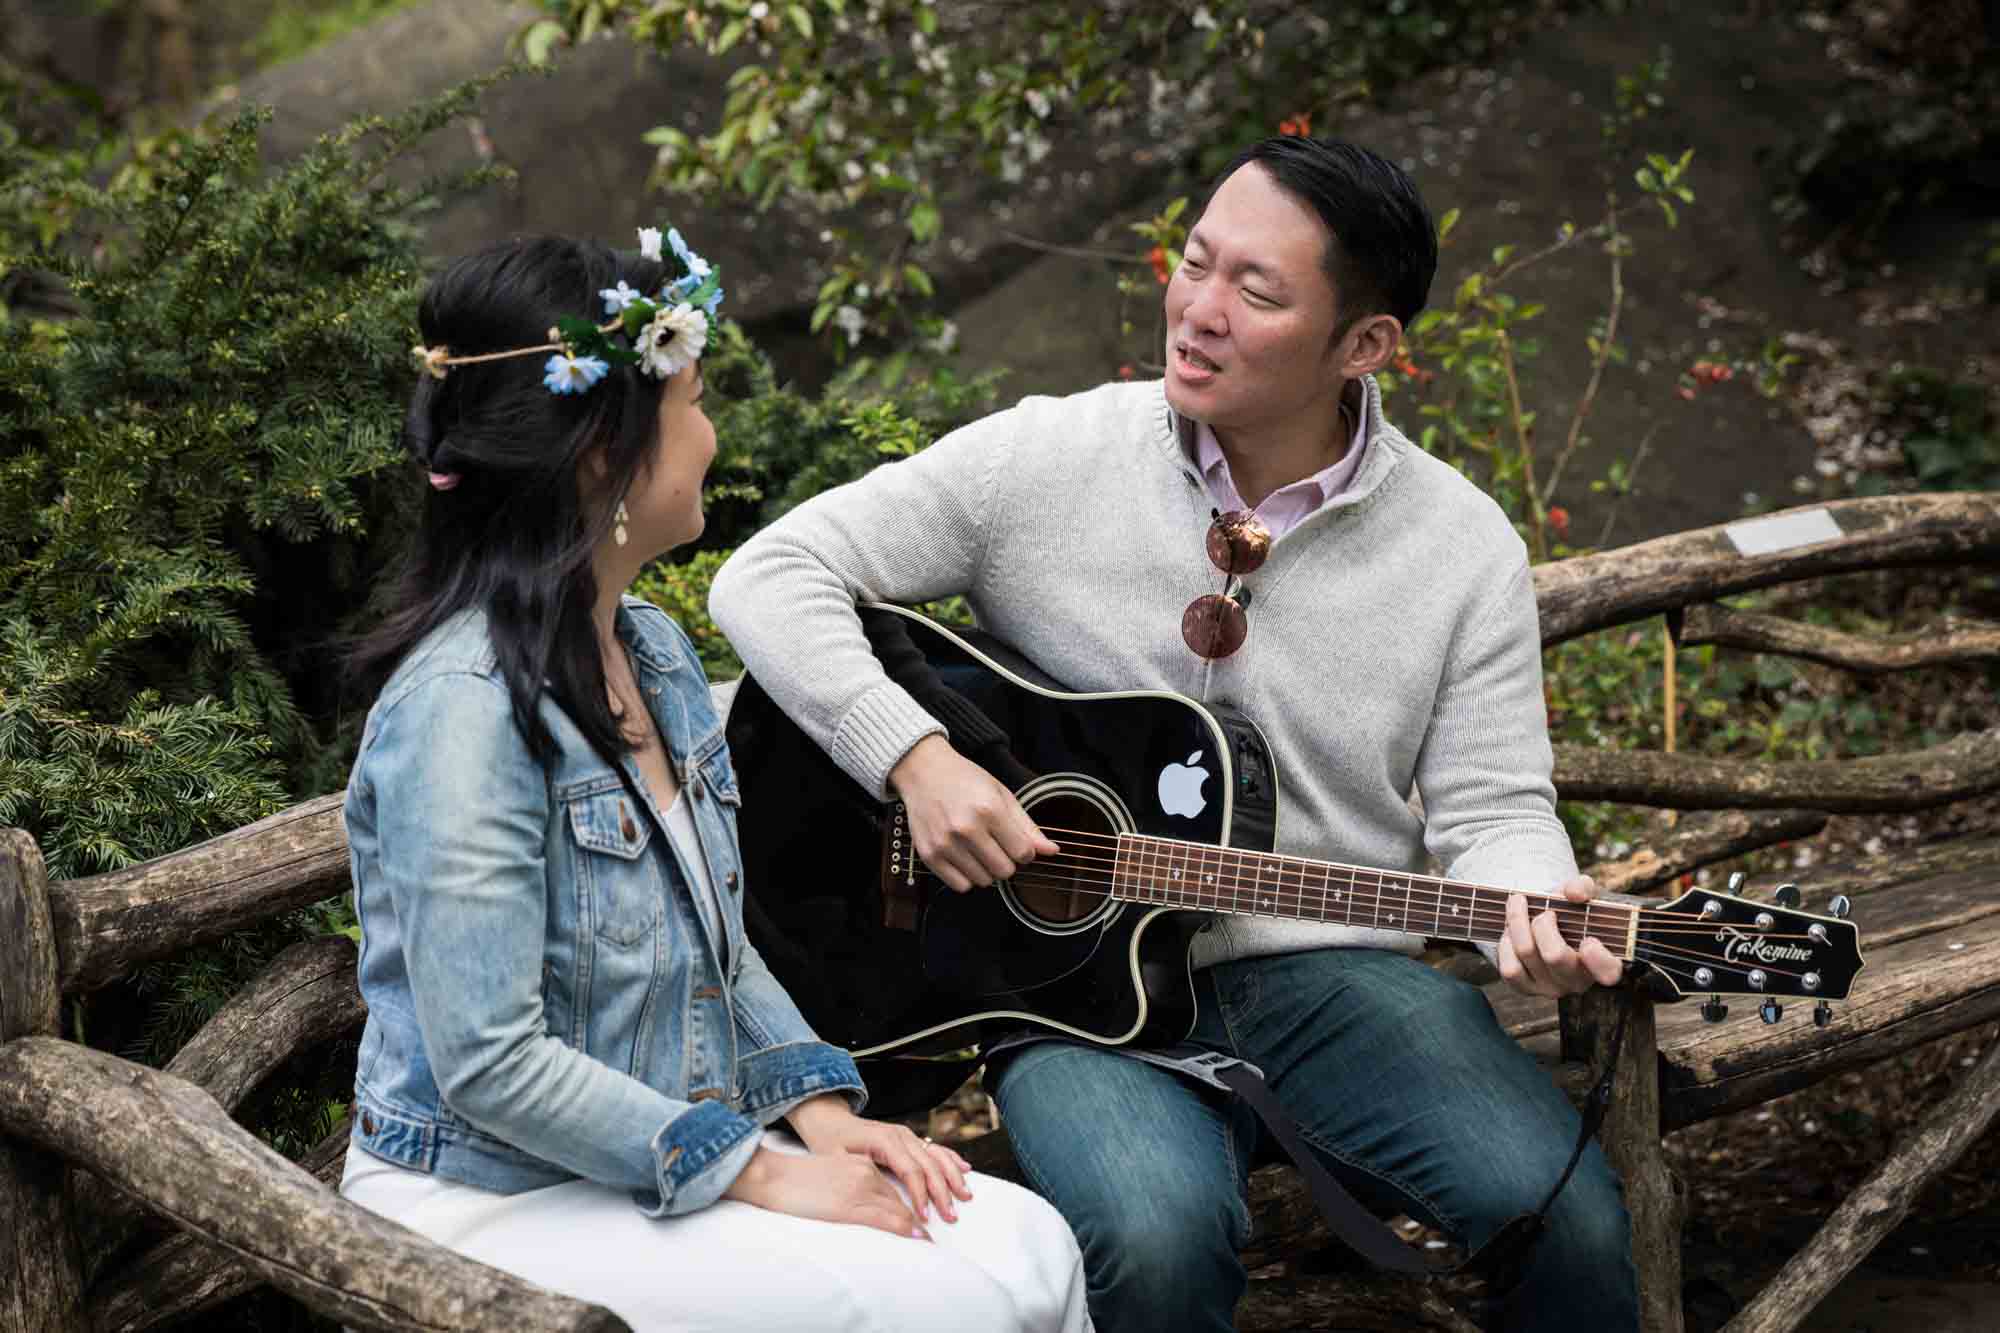 Man playing guitar for woman in Shakespeare Garden during engagement shoot